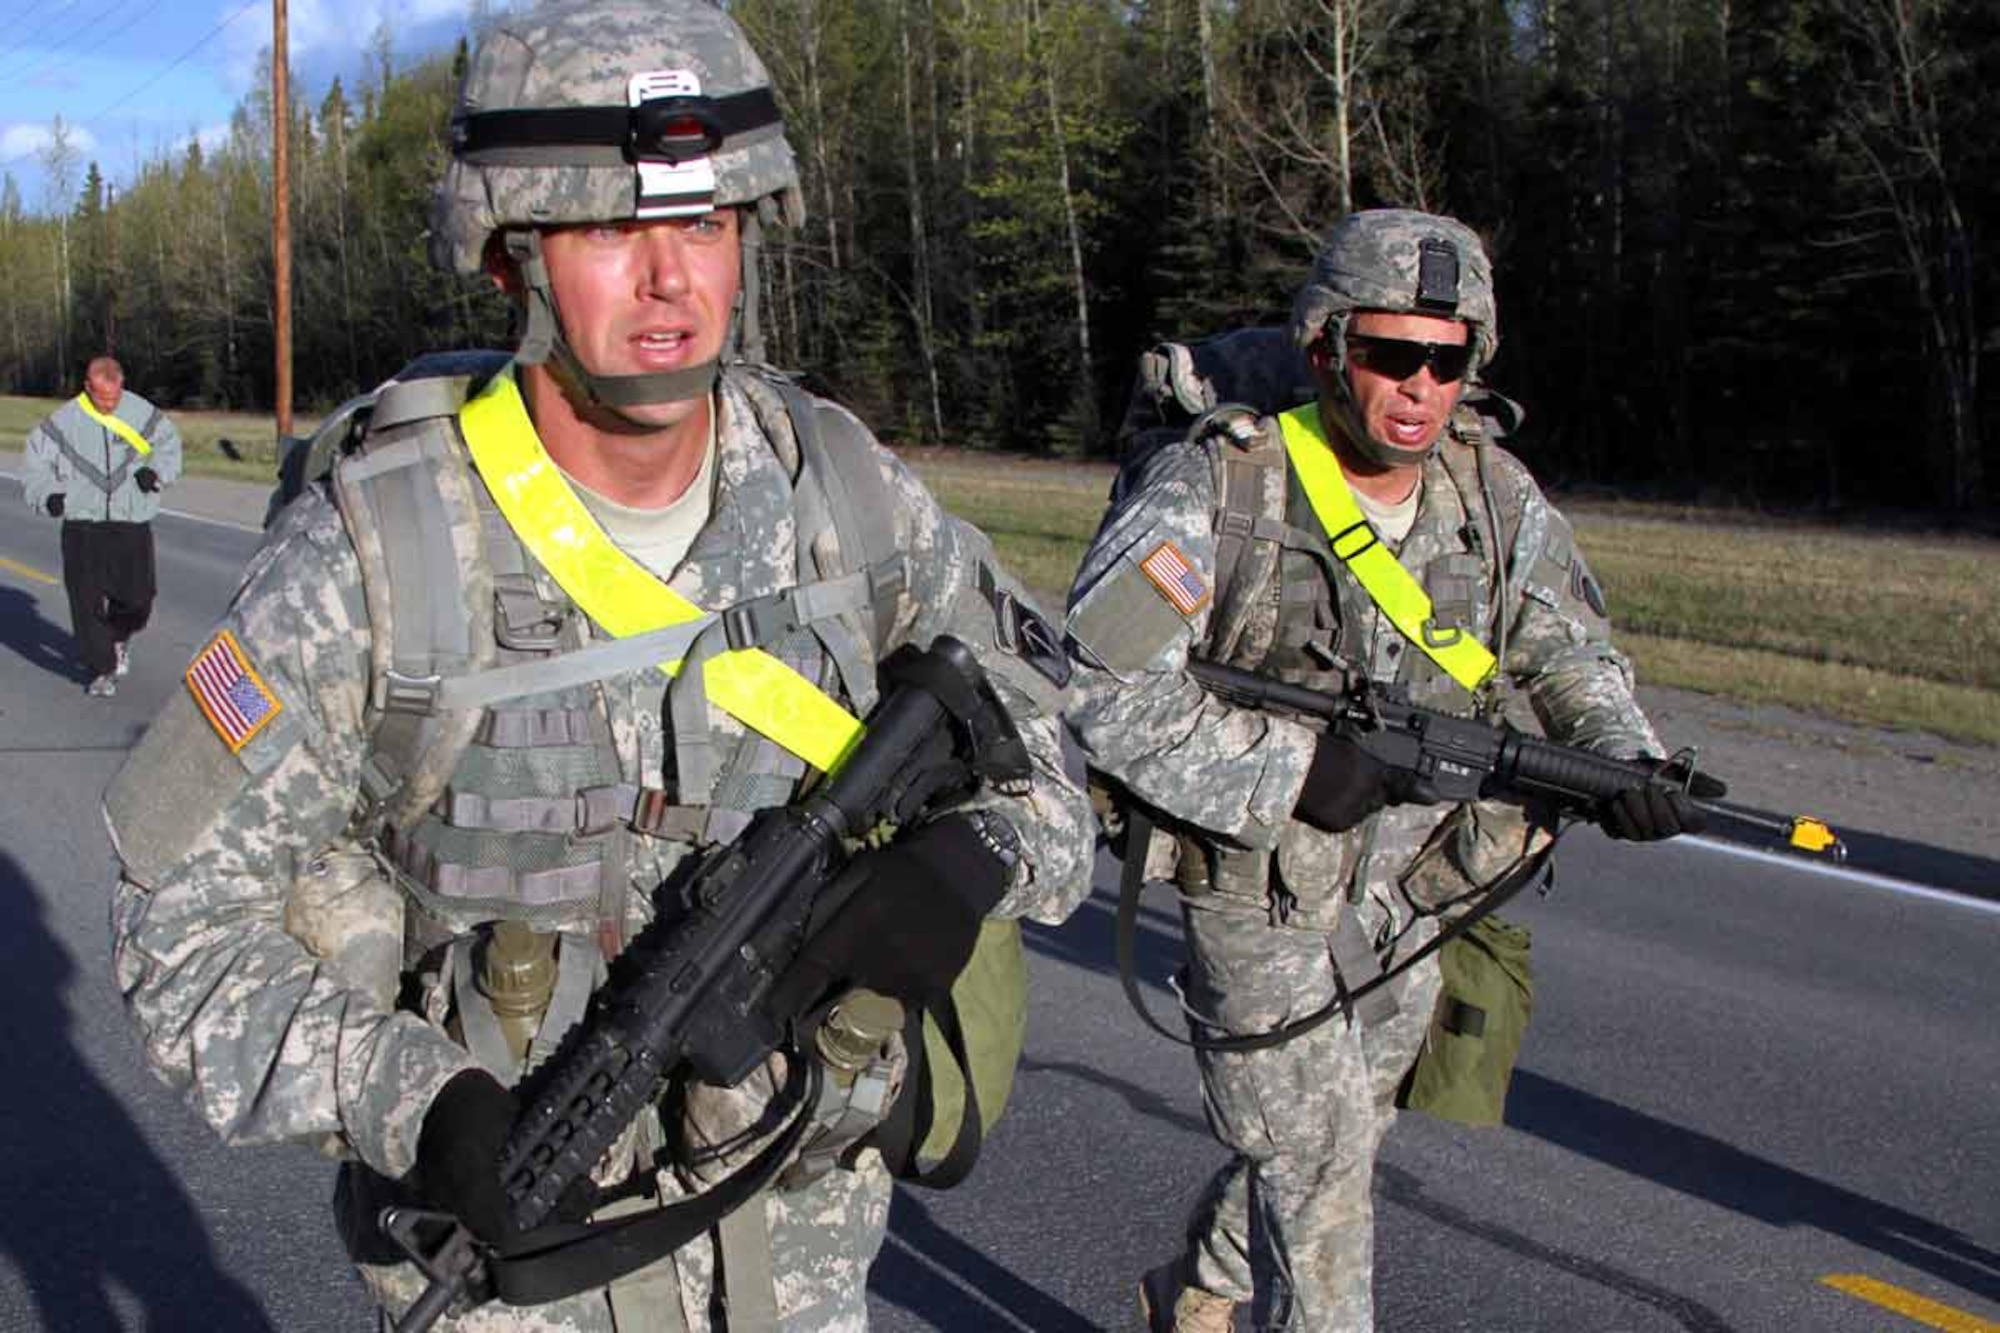 Pfc. Jason Woolard, 6th Engineer Battalion (Combat) (Airborne), and Spc. Ronald Burton, 725th Brigade Support Battalion (Airborne), cross the four-mile marker during a 12-mile road march, May 20, part of the test for the Expert Field Medical Badge. (U.S. Army photo/Staff Sgt. Jason Epperson)